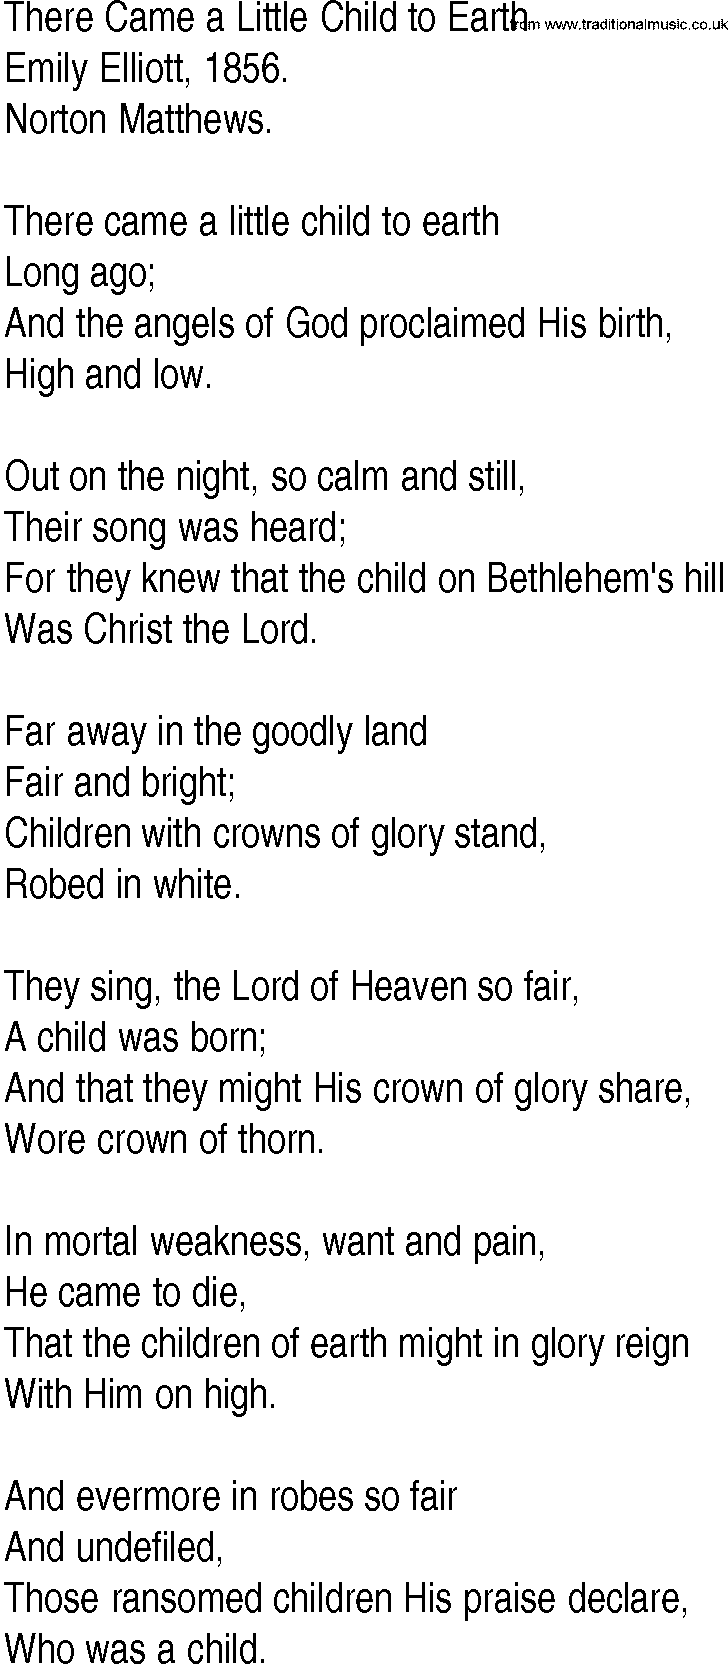 Hymn and Gospel Song: There Came a Little Child to Earth by Emily Elliott lyrics